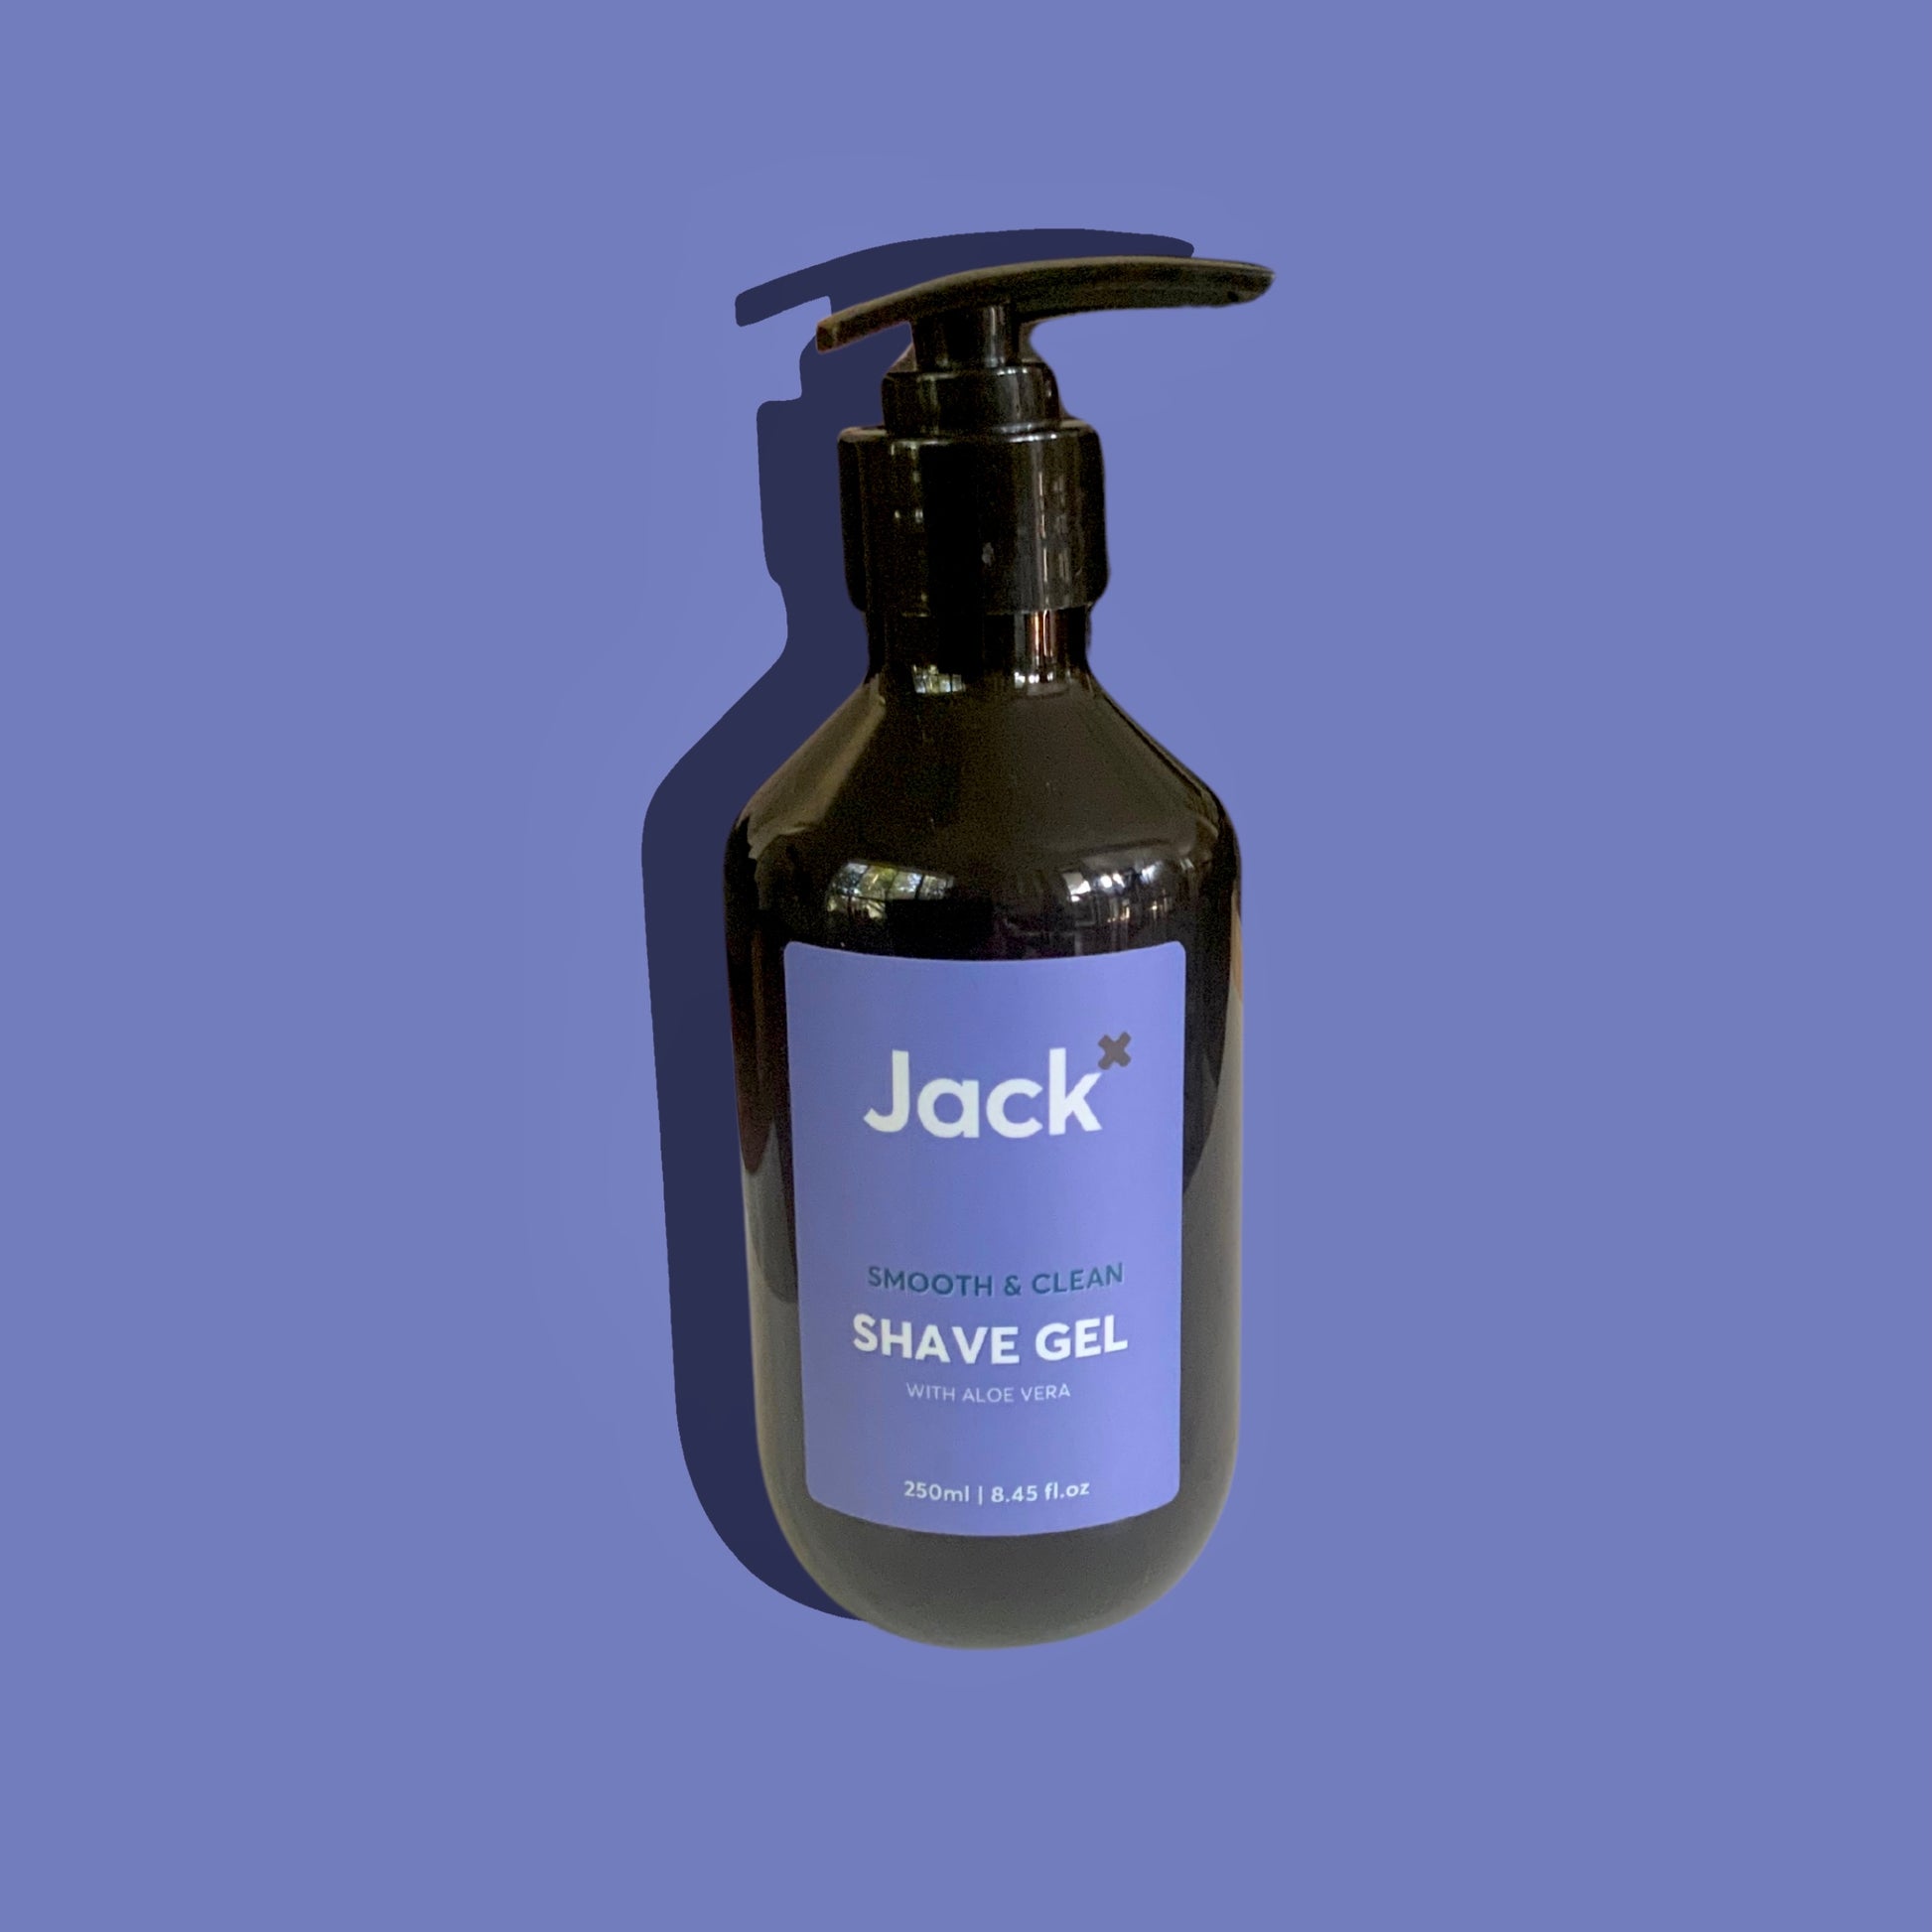 Jack the Snipper shave gel with aloe vera